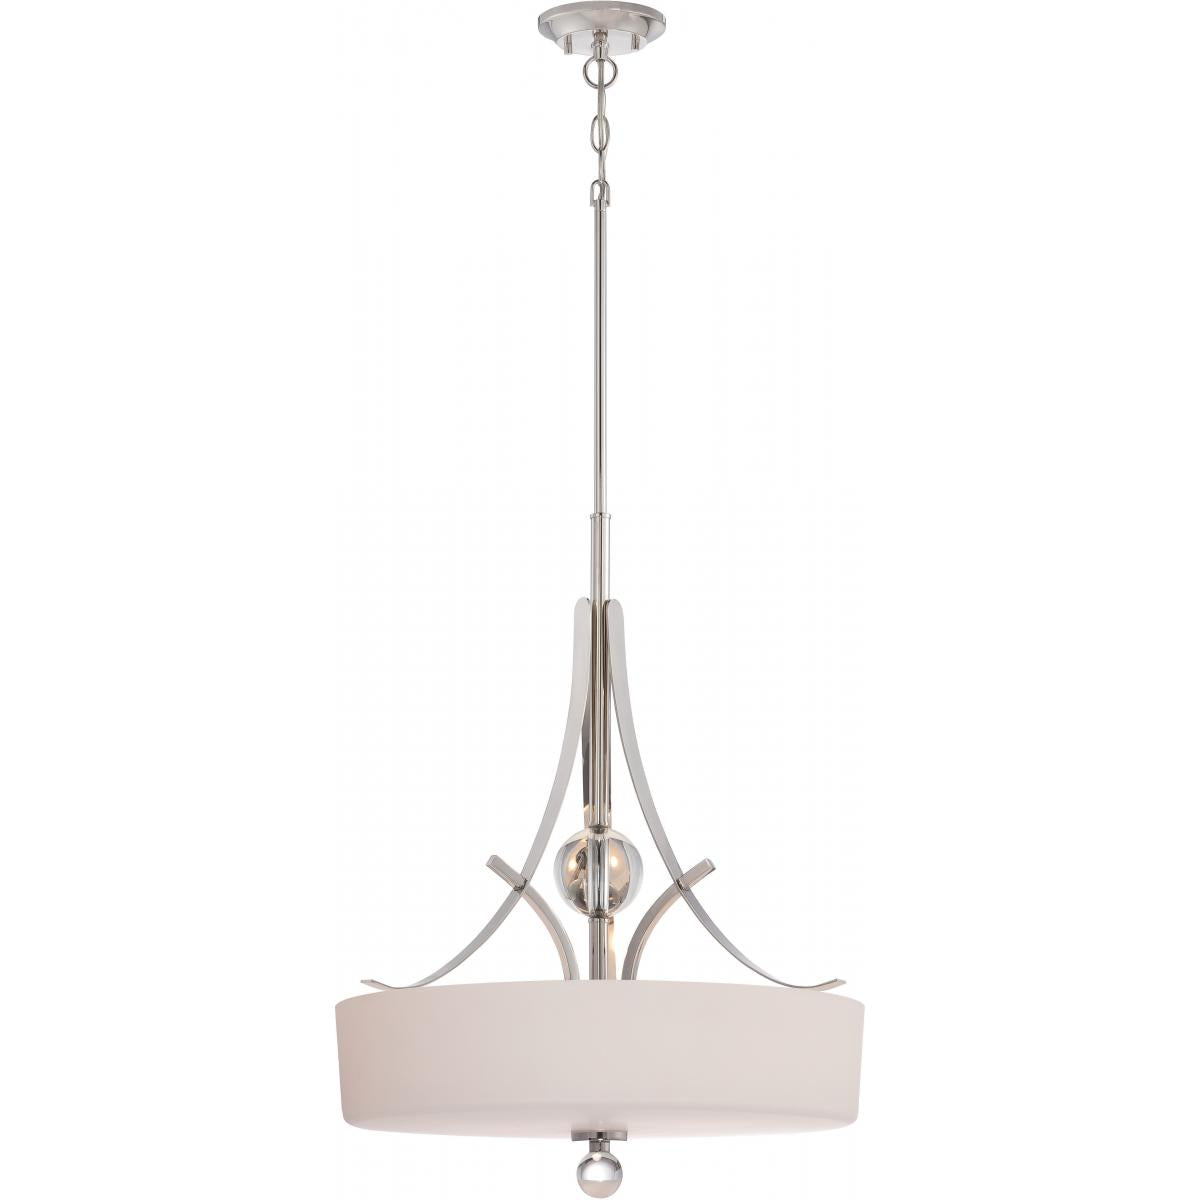 Connie - 3 Light Pendant with Satin White Glass - Polished Nickel Finish